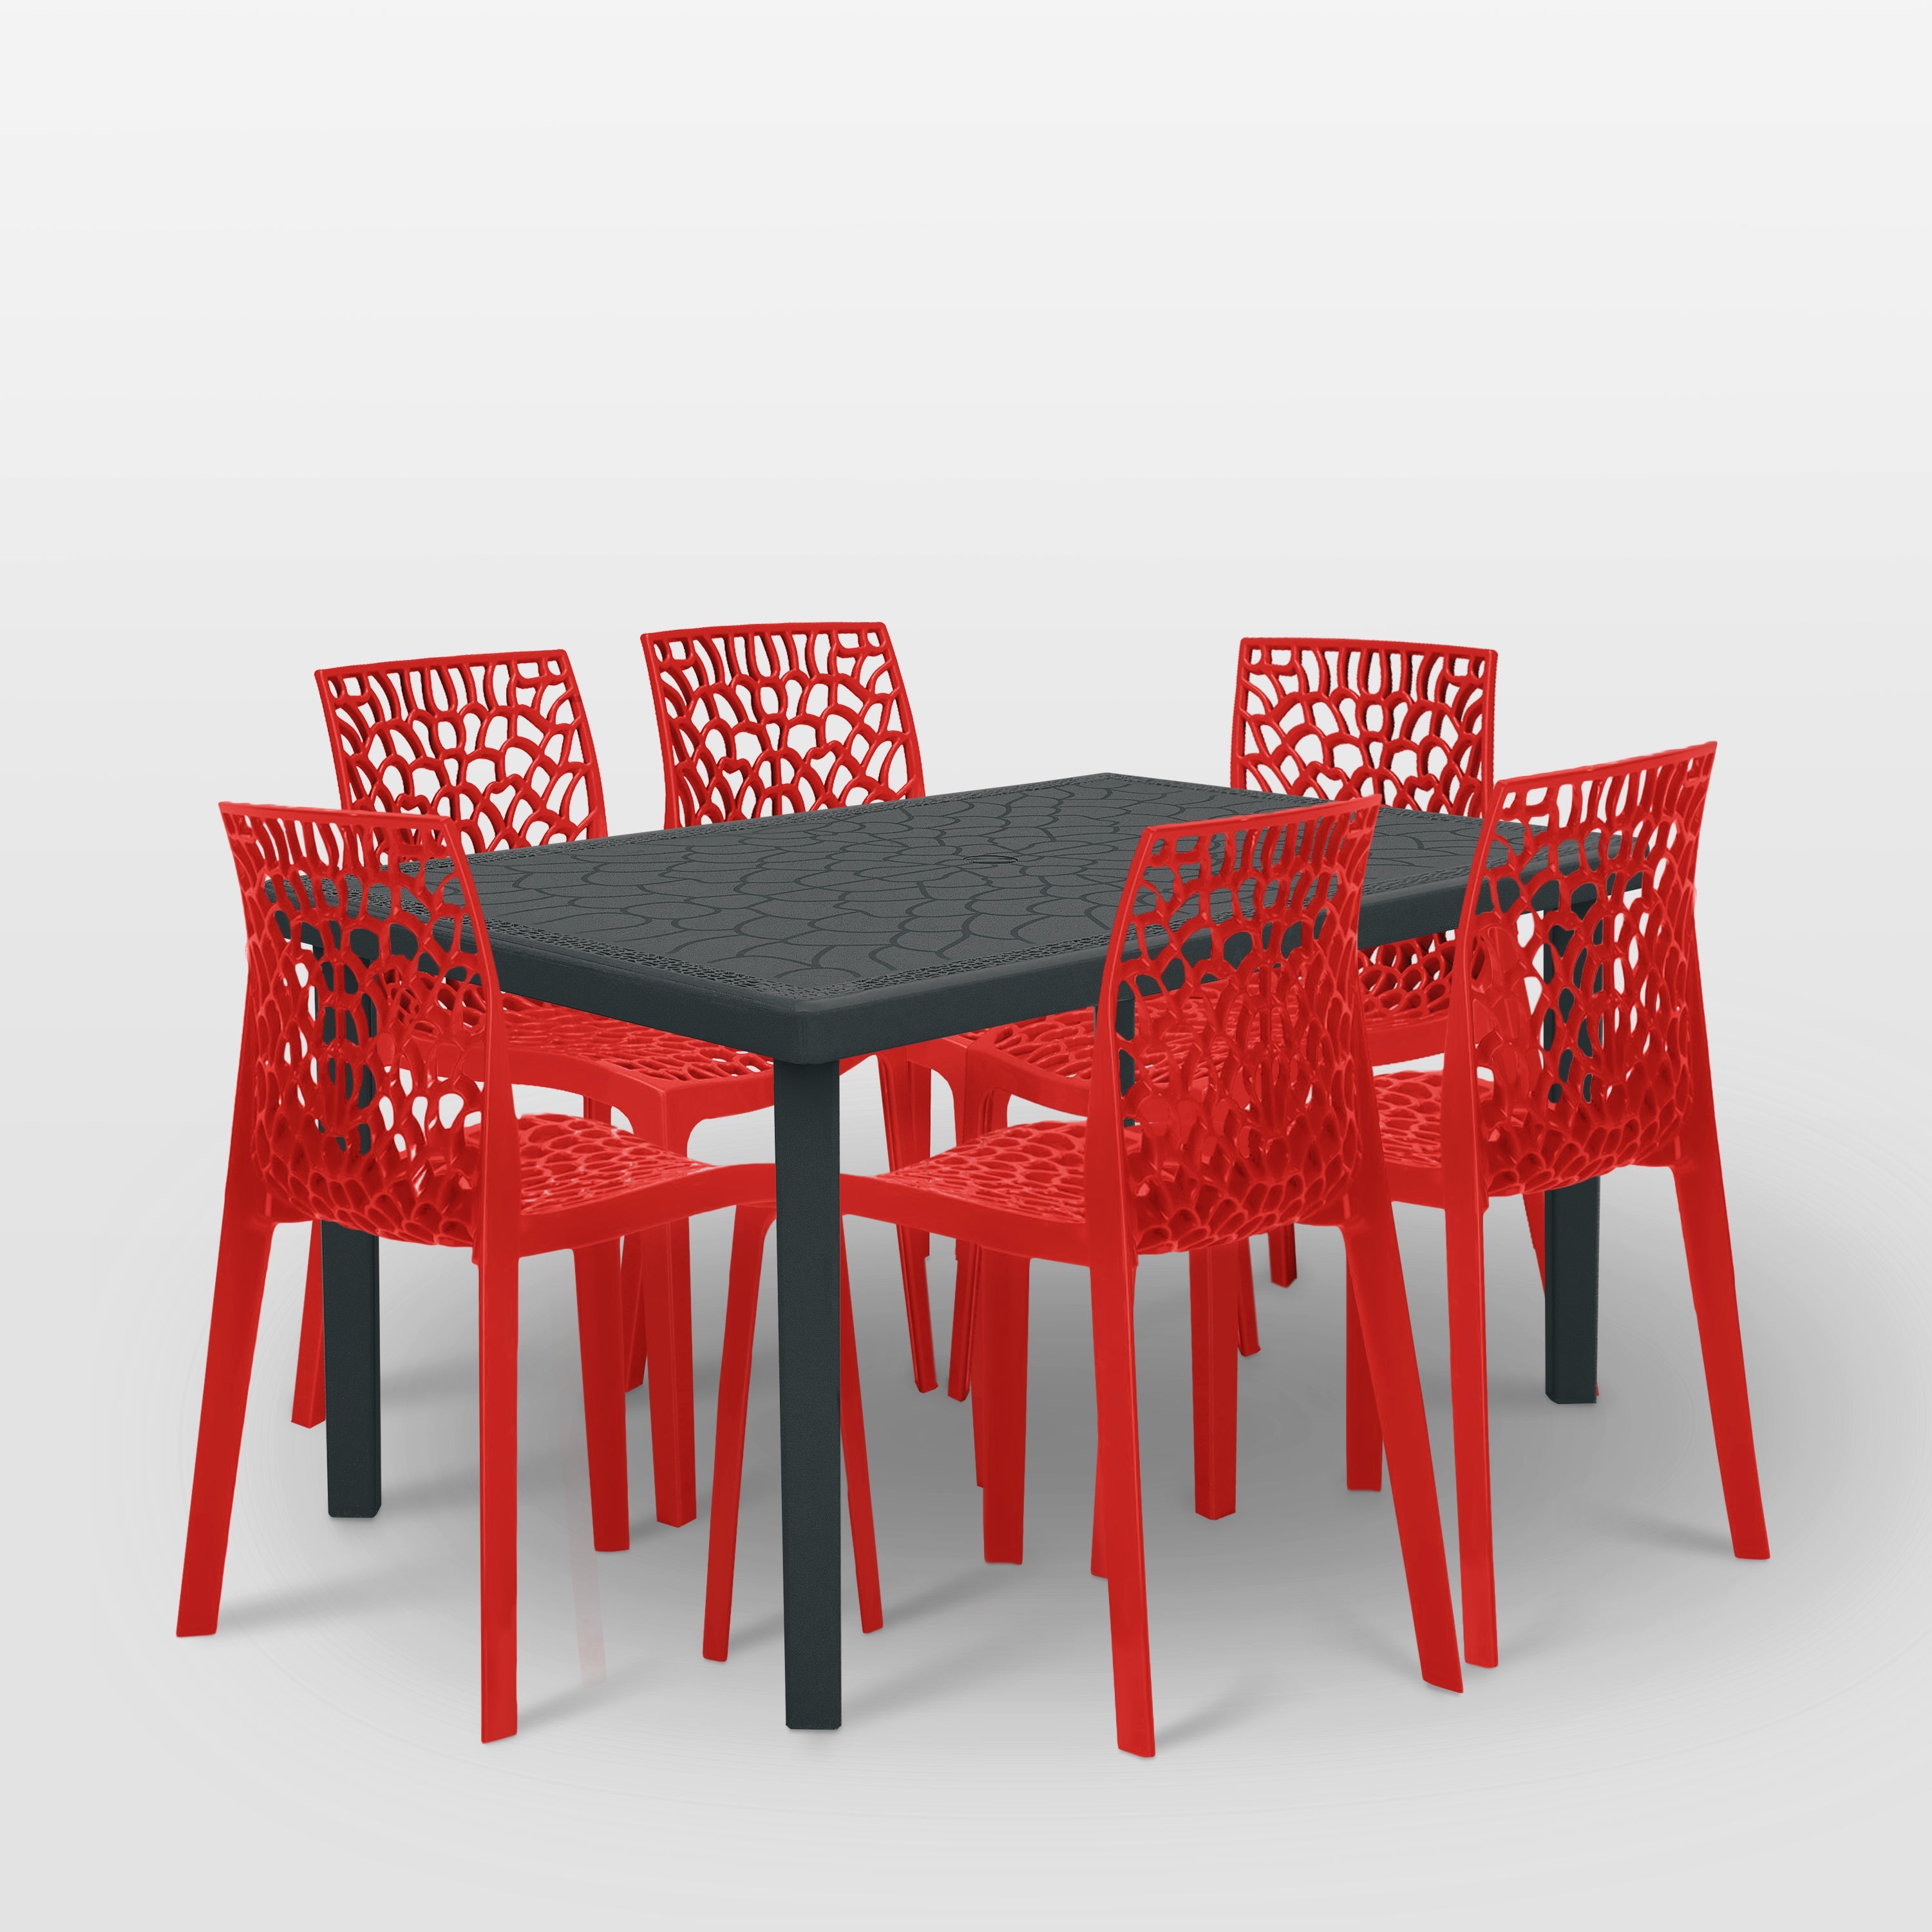 Supreme Web Red Chair Plastic Outdoor Chair Price in India - Buy Supreme  Web Red Chair Plastic Outdoor Chair online at